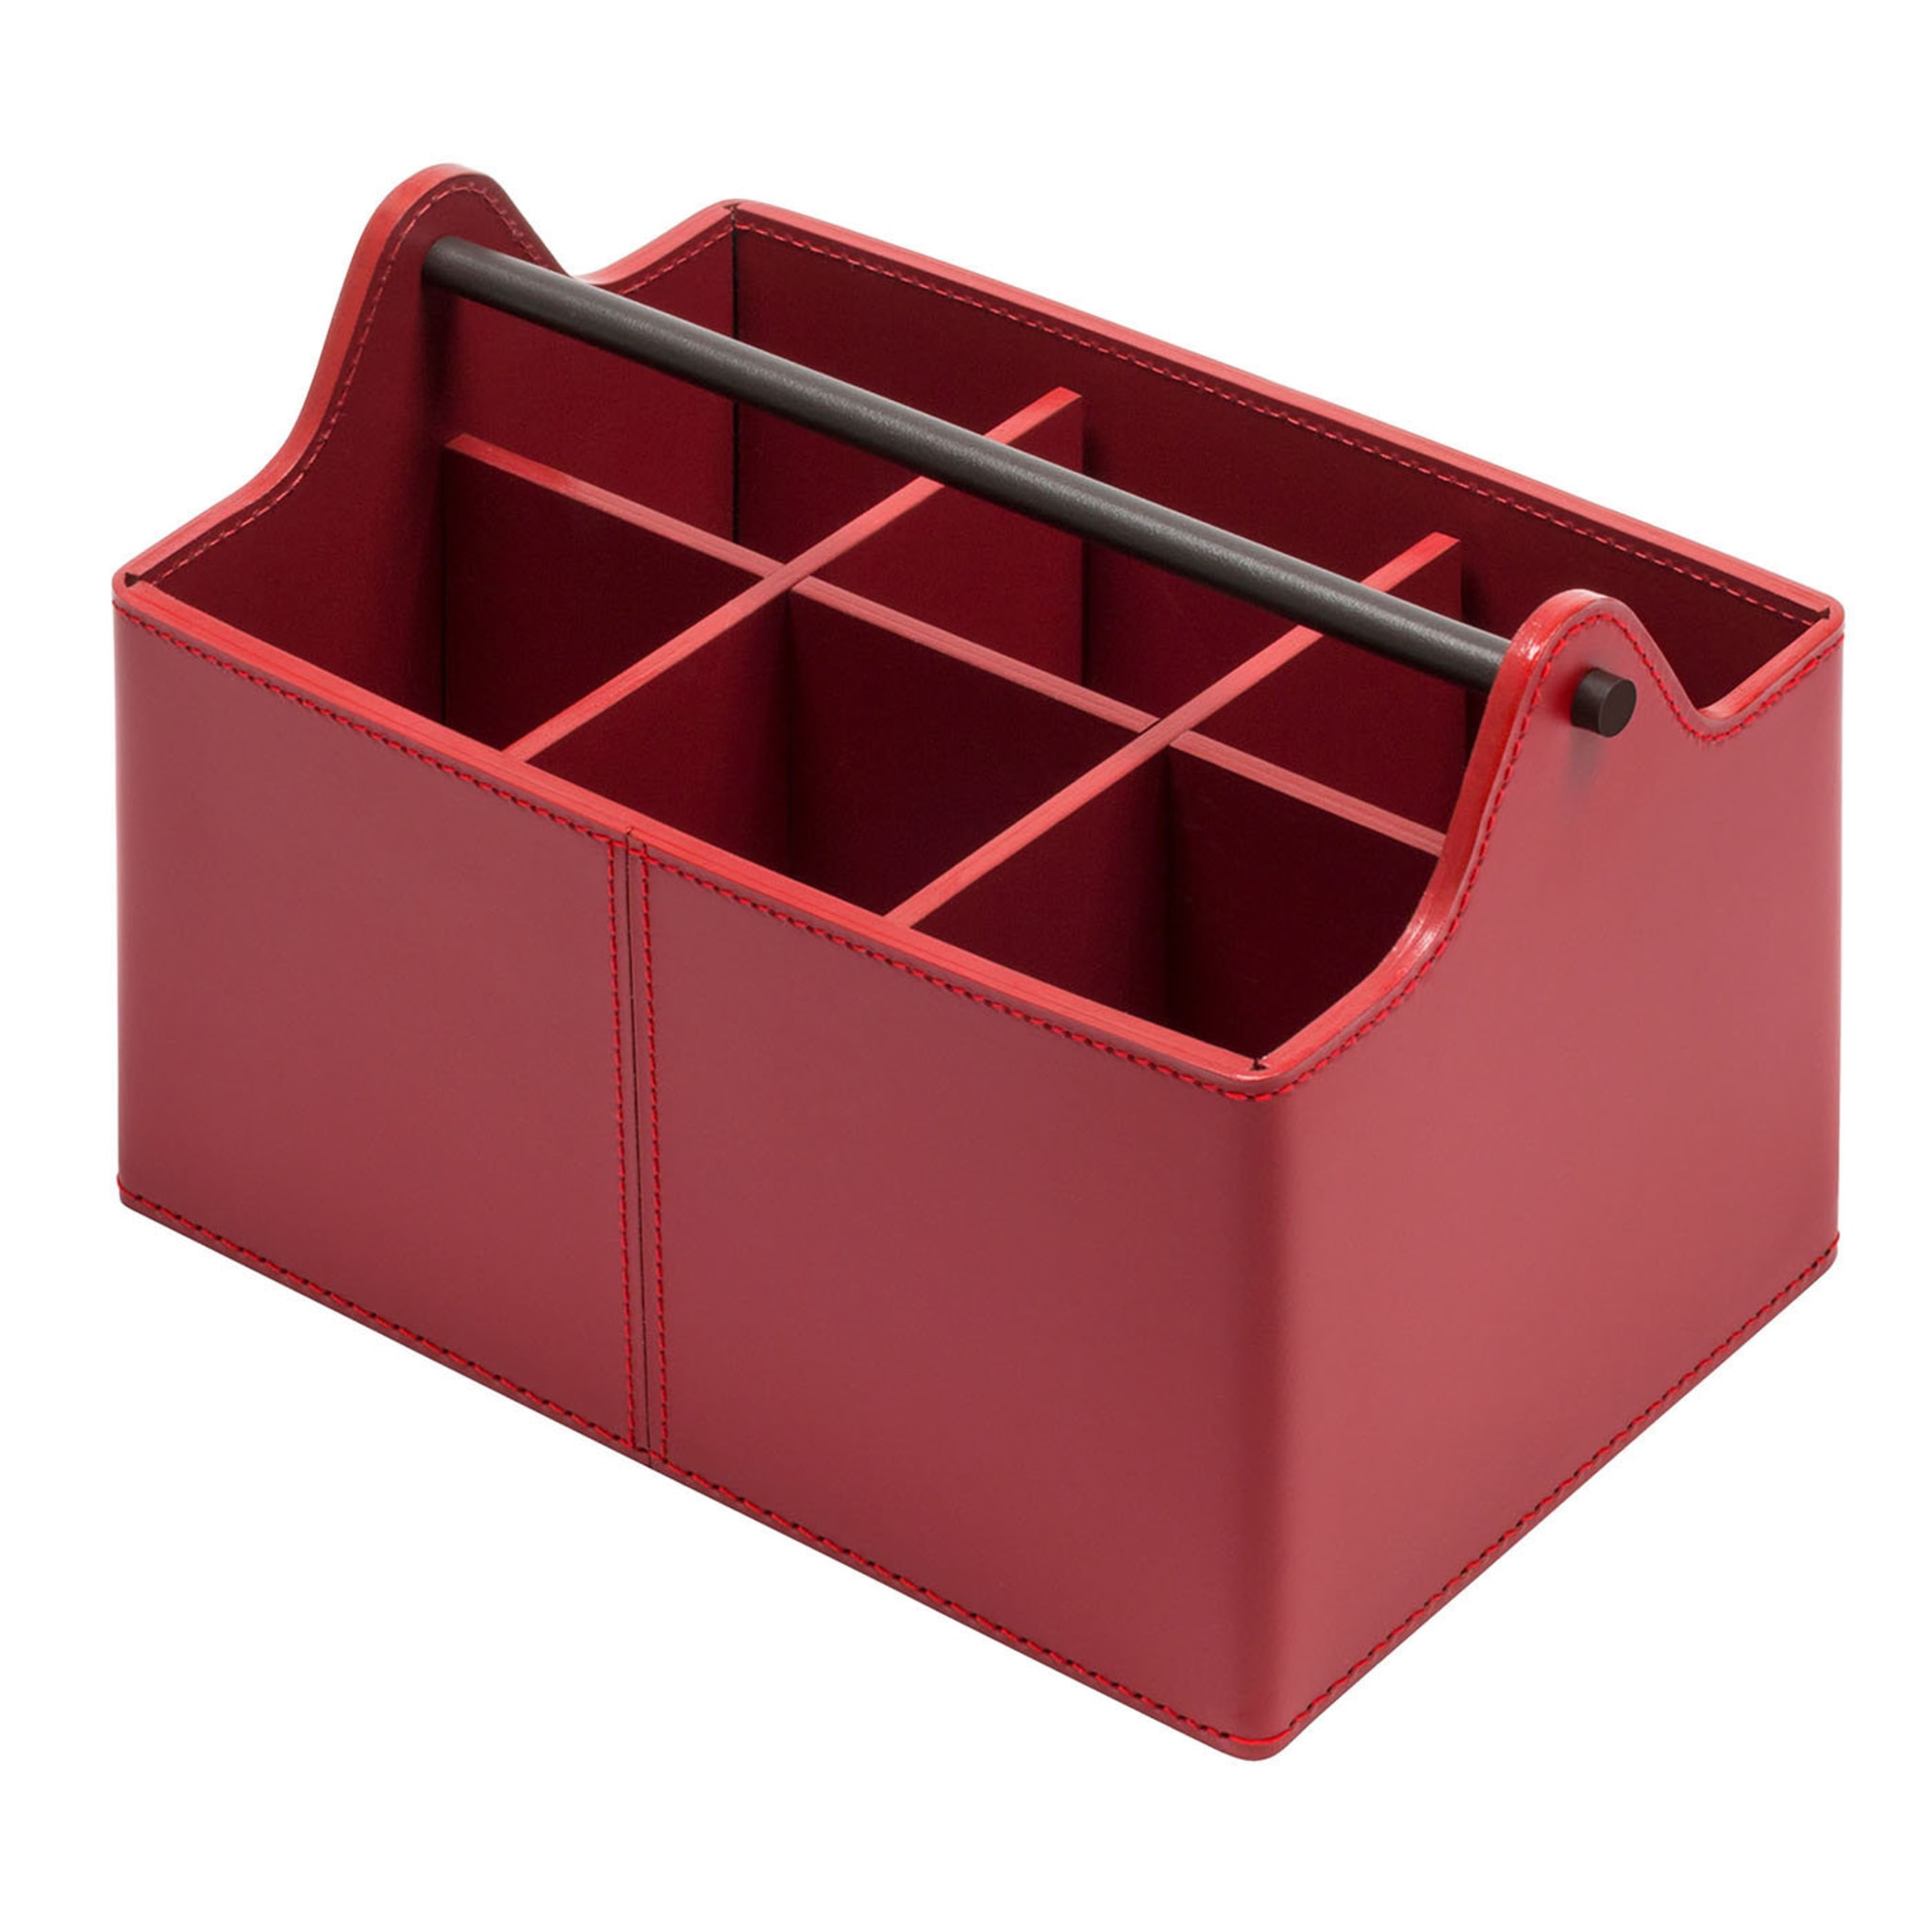 CIrcuit Red Low Basket with 6 Dividers - Main view